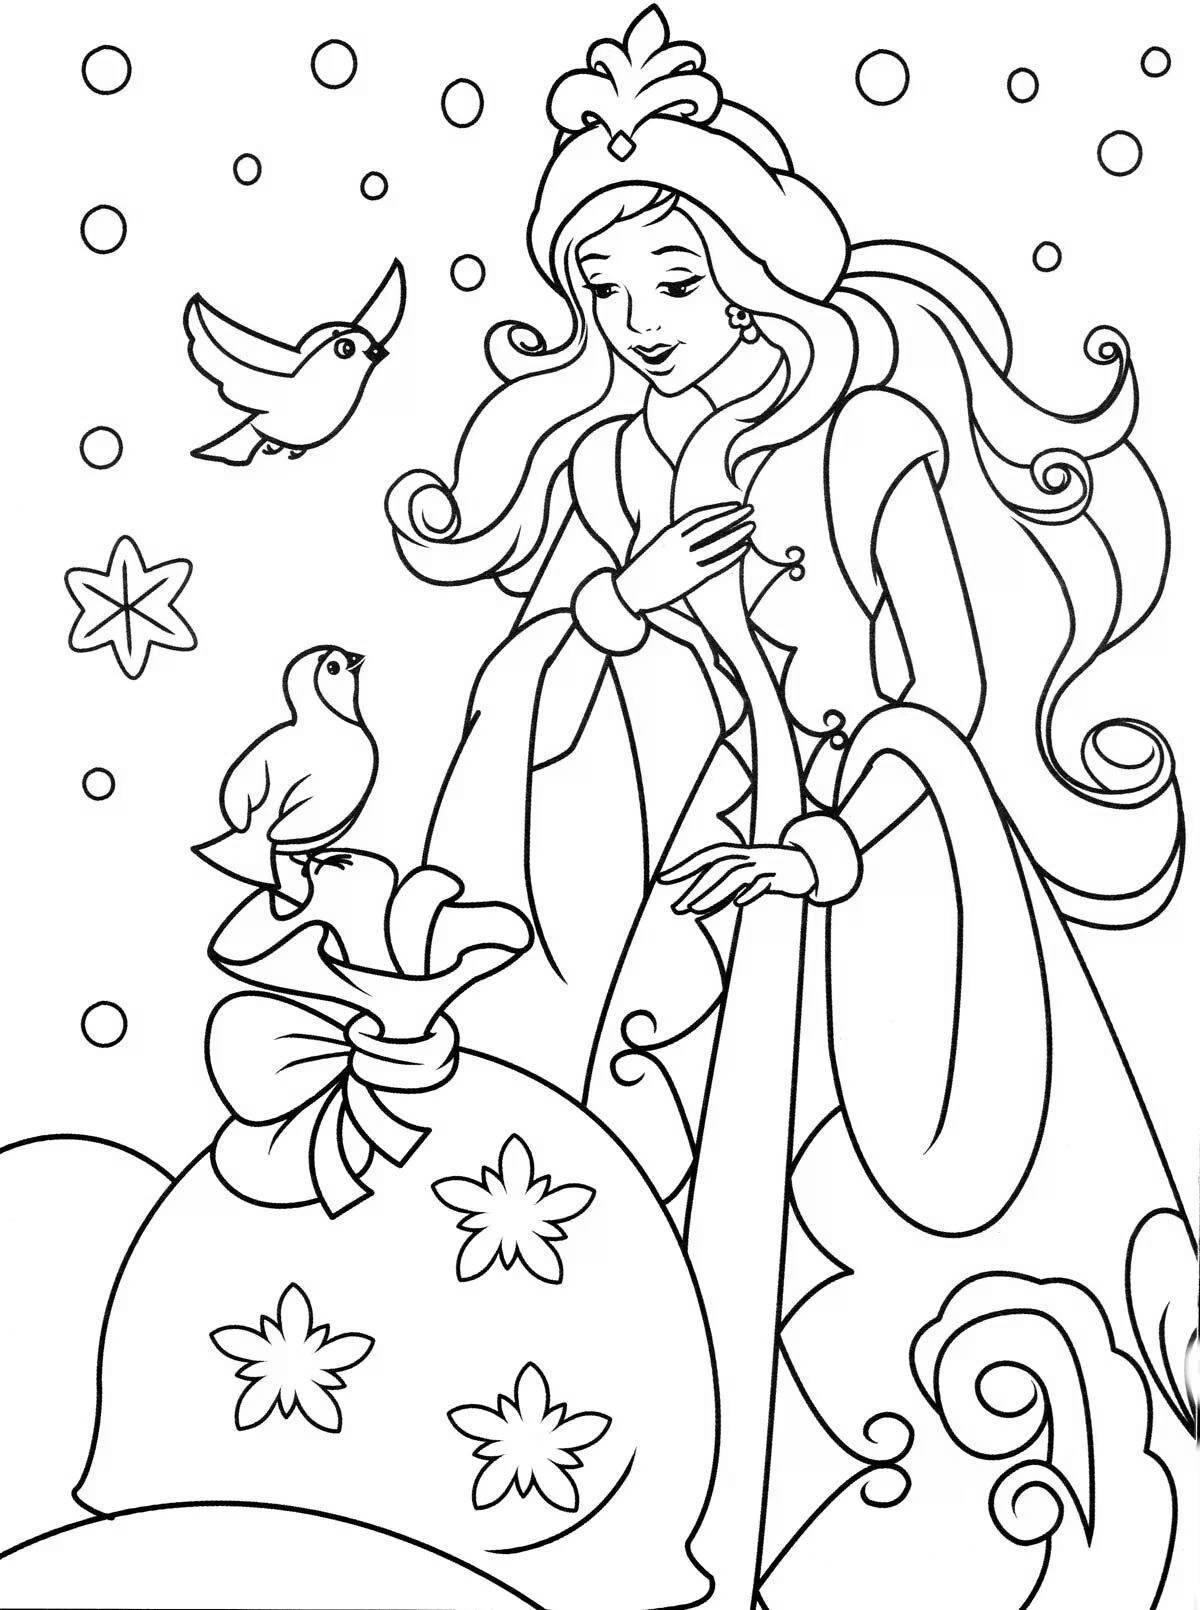 Radiant Christmas coloring book for girls